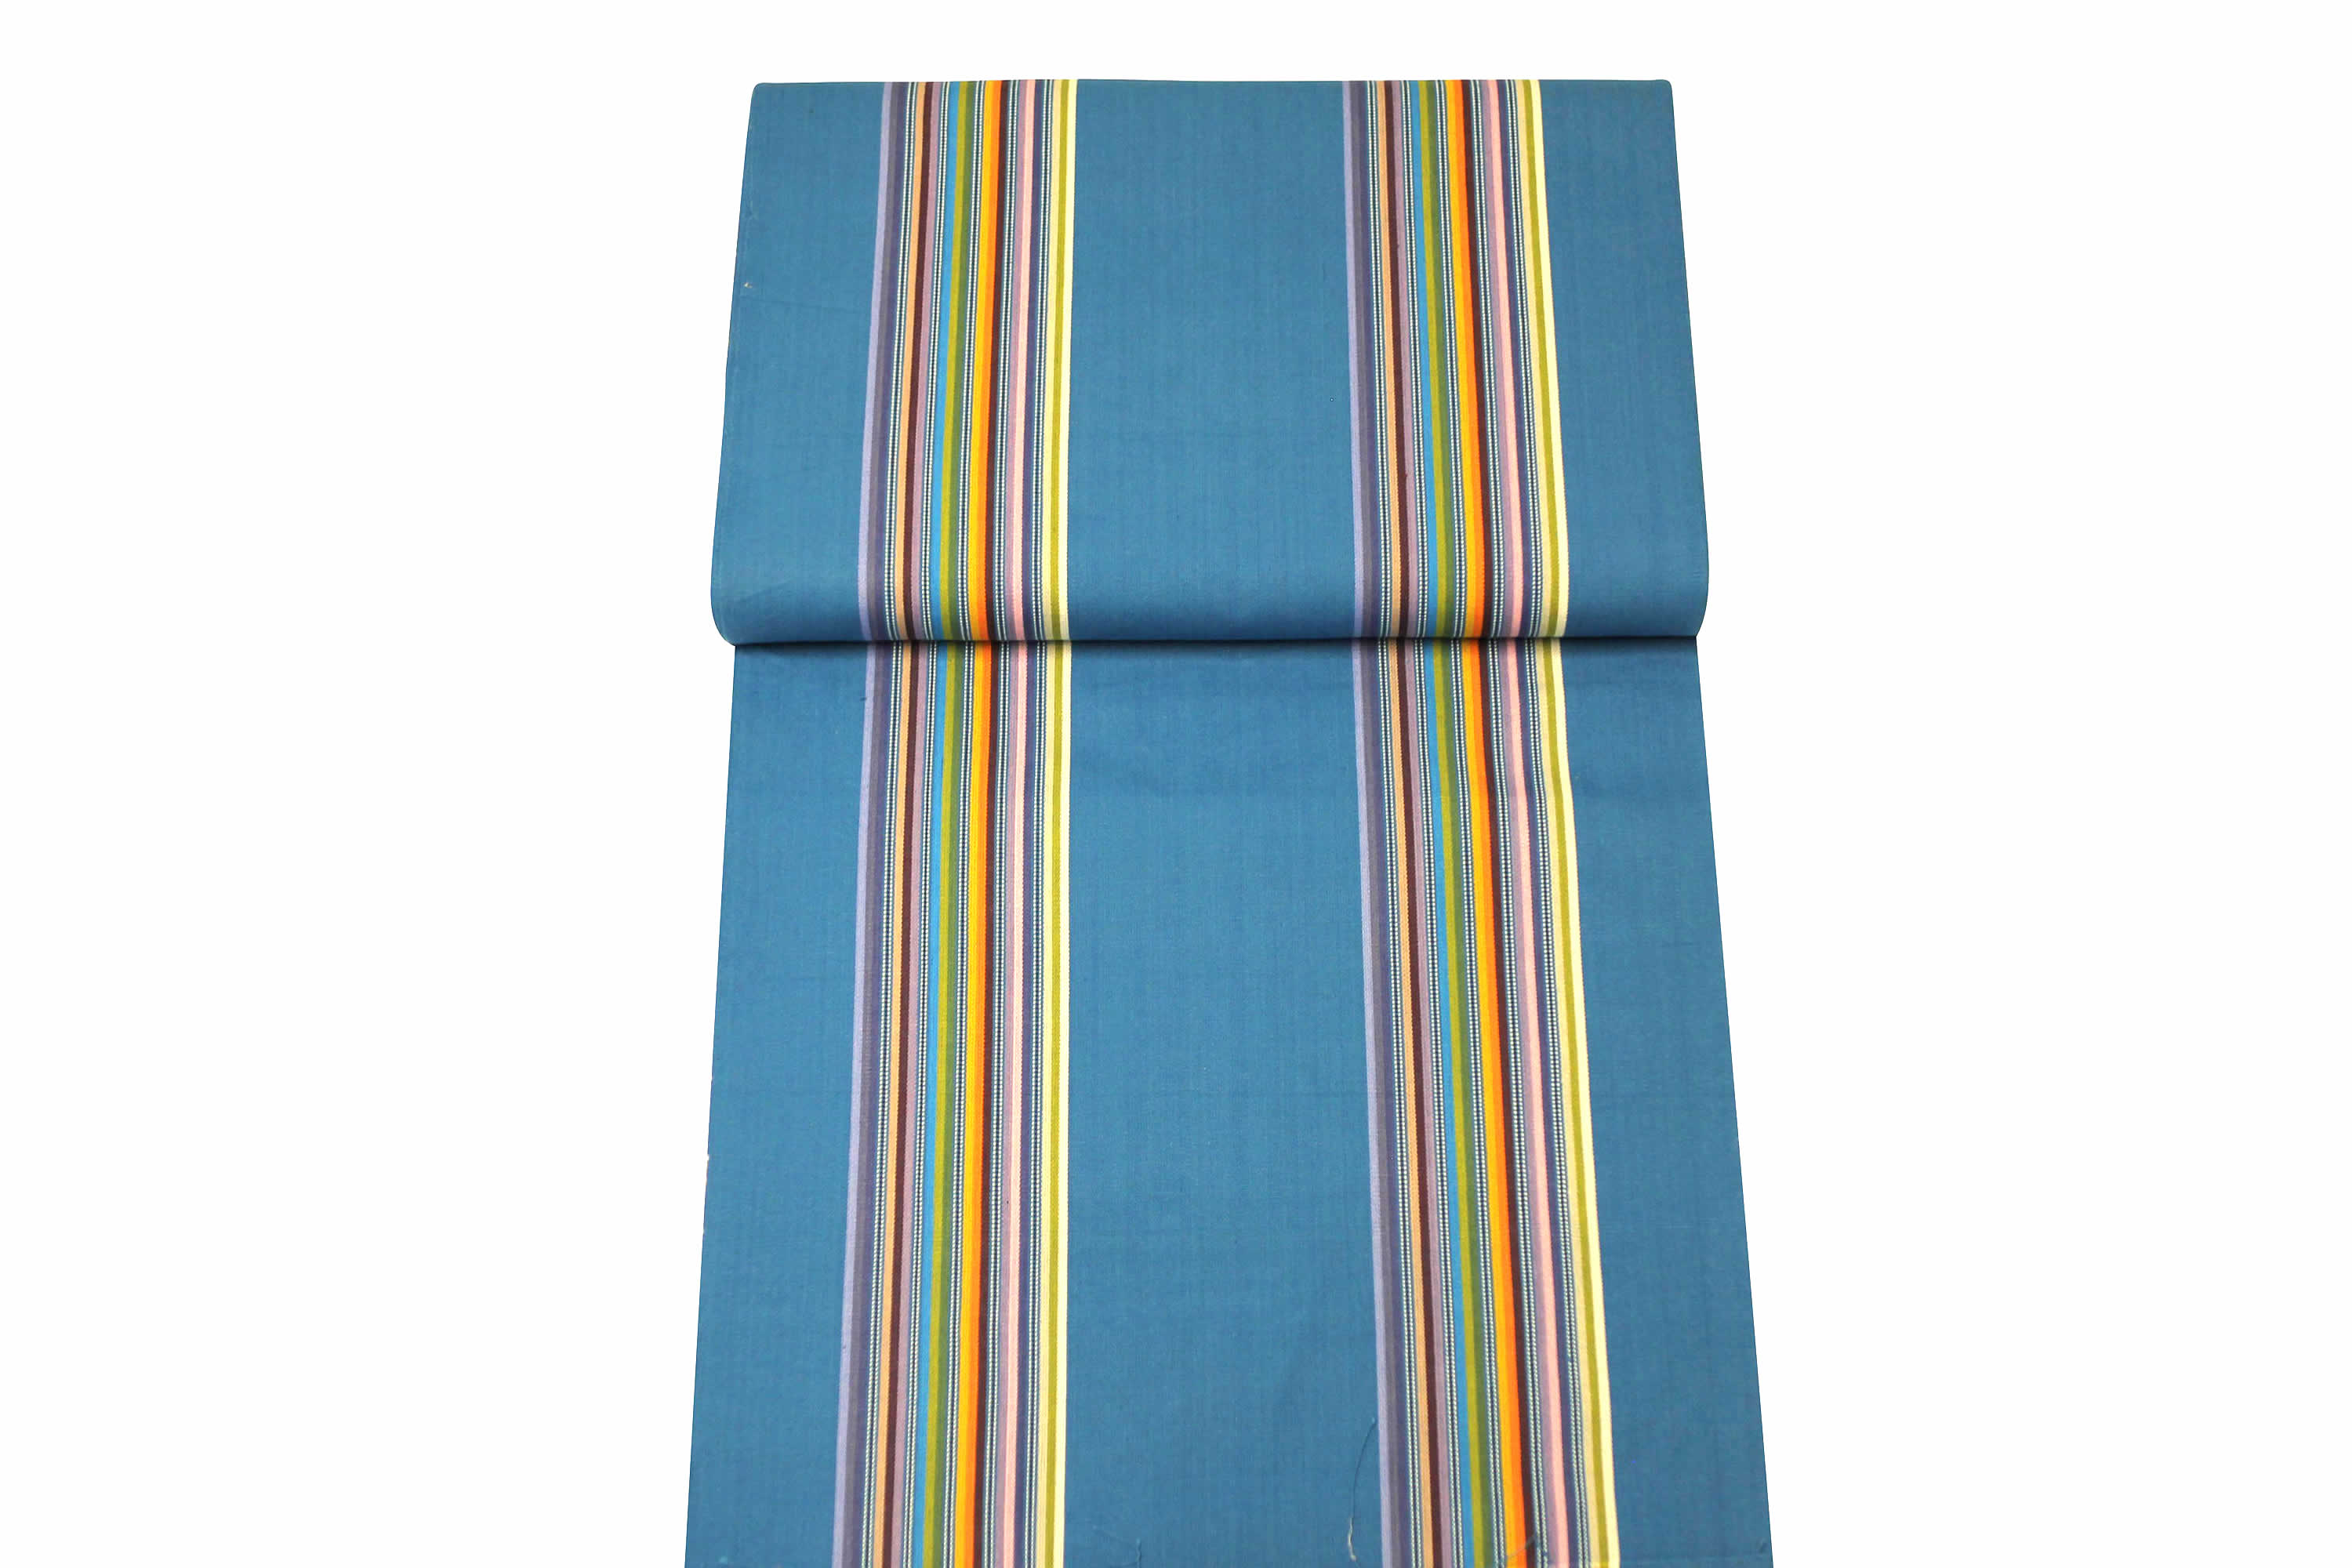 Turquoise Deck Chair Canvas Fabric